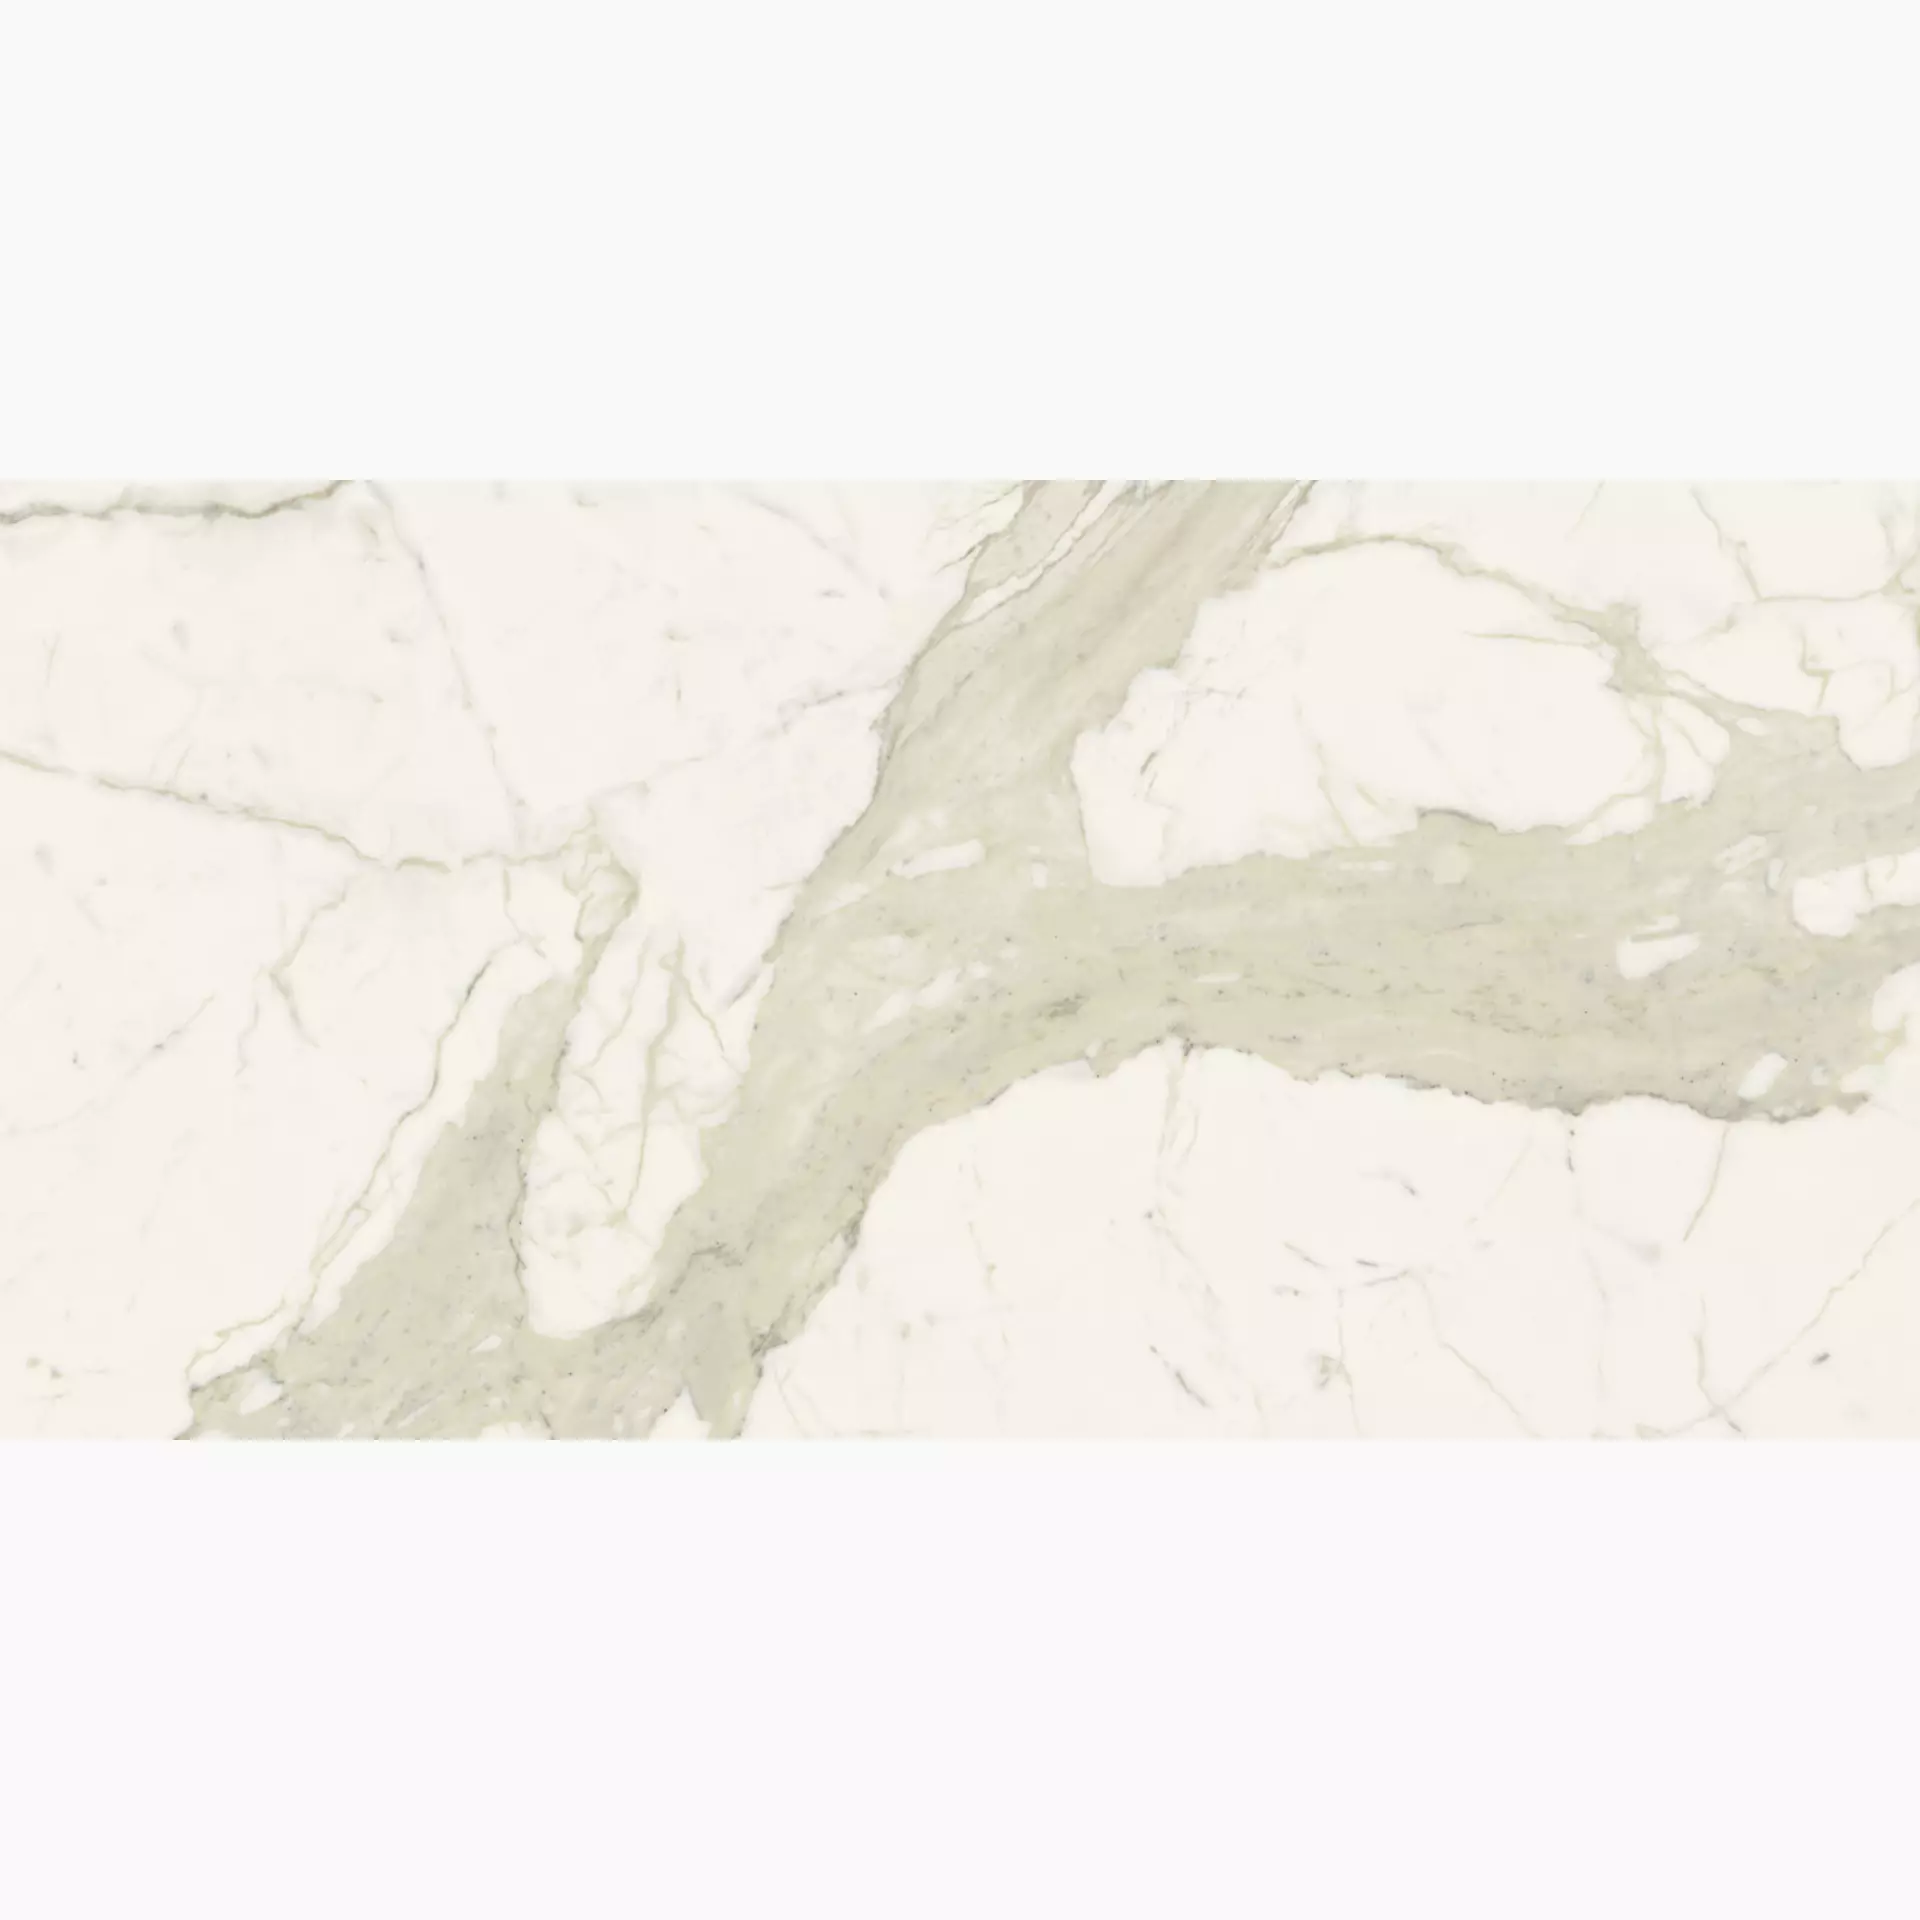 FMG Marble Active Calacatta Active IAS195X864 60x120cm rectified 9mm